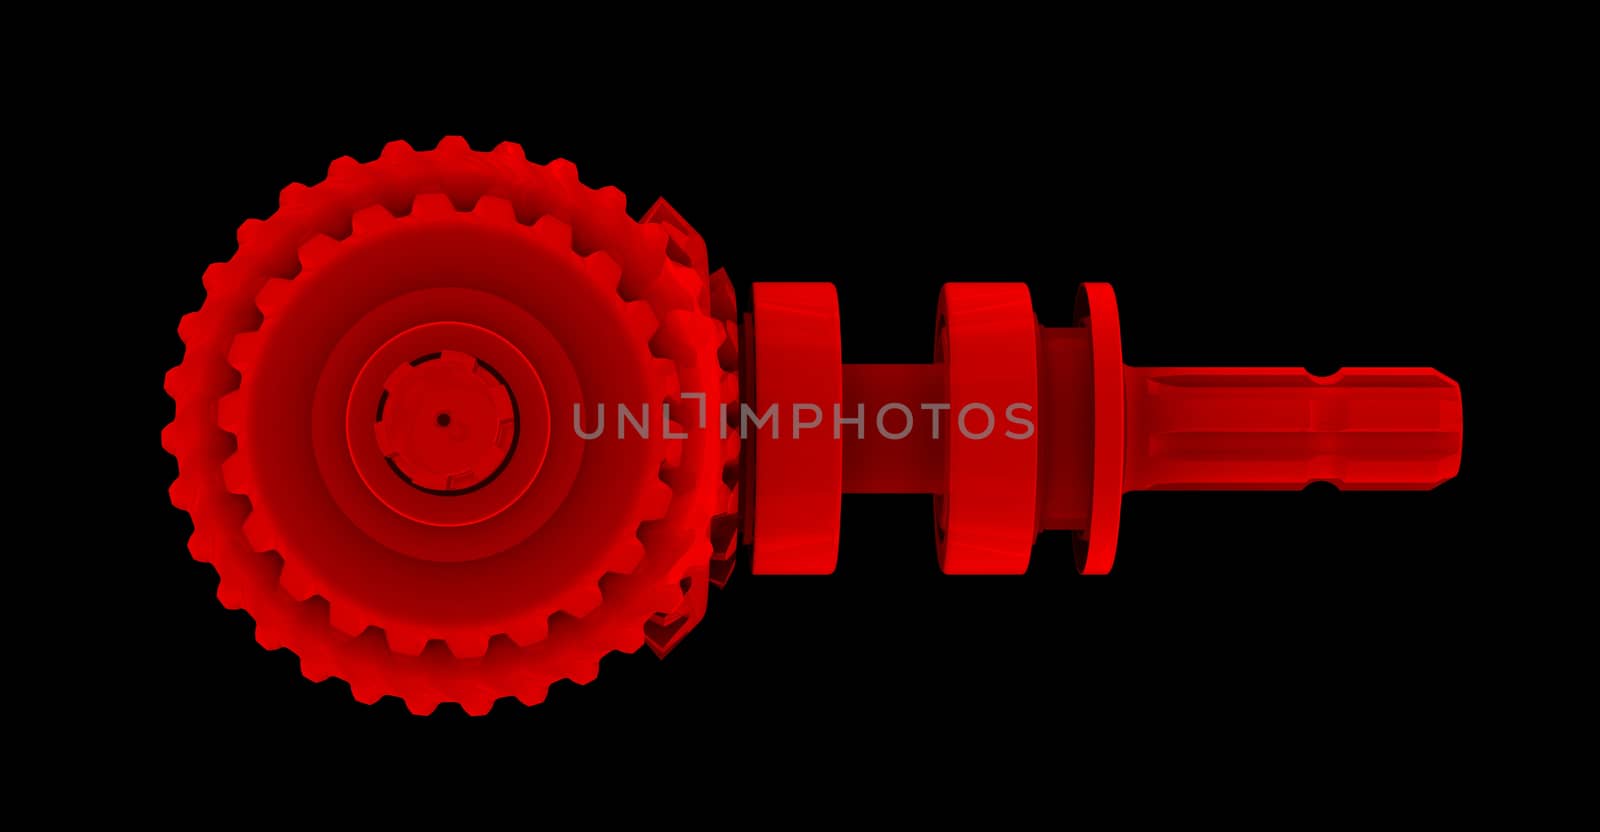 Hypoid gear. Isolated render on a black background